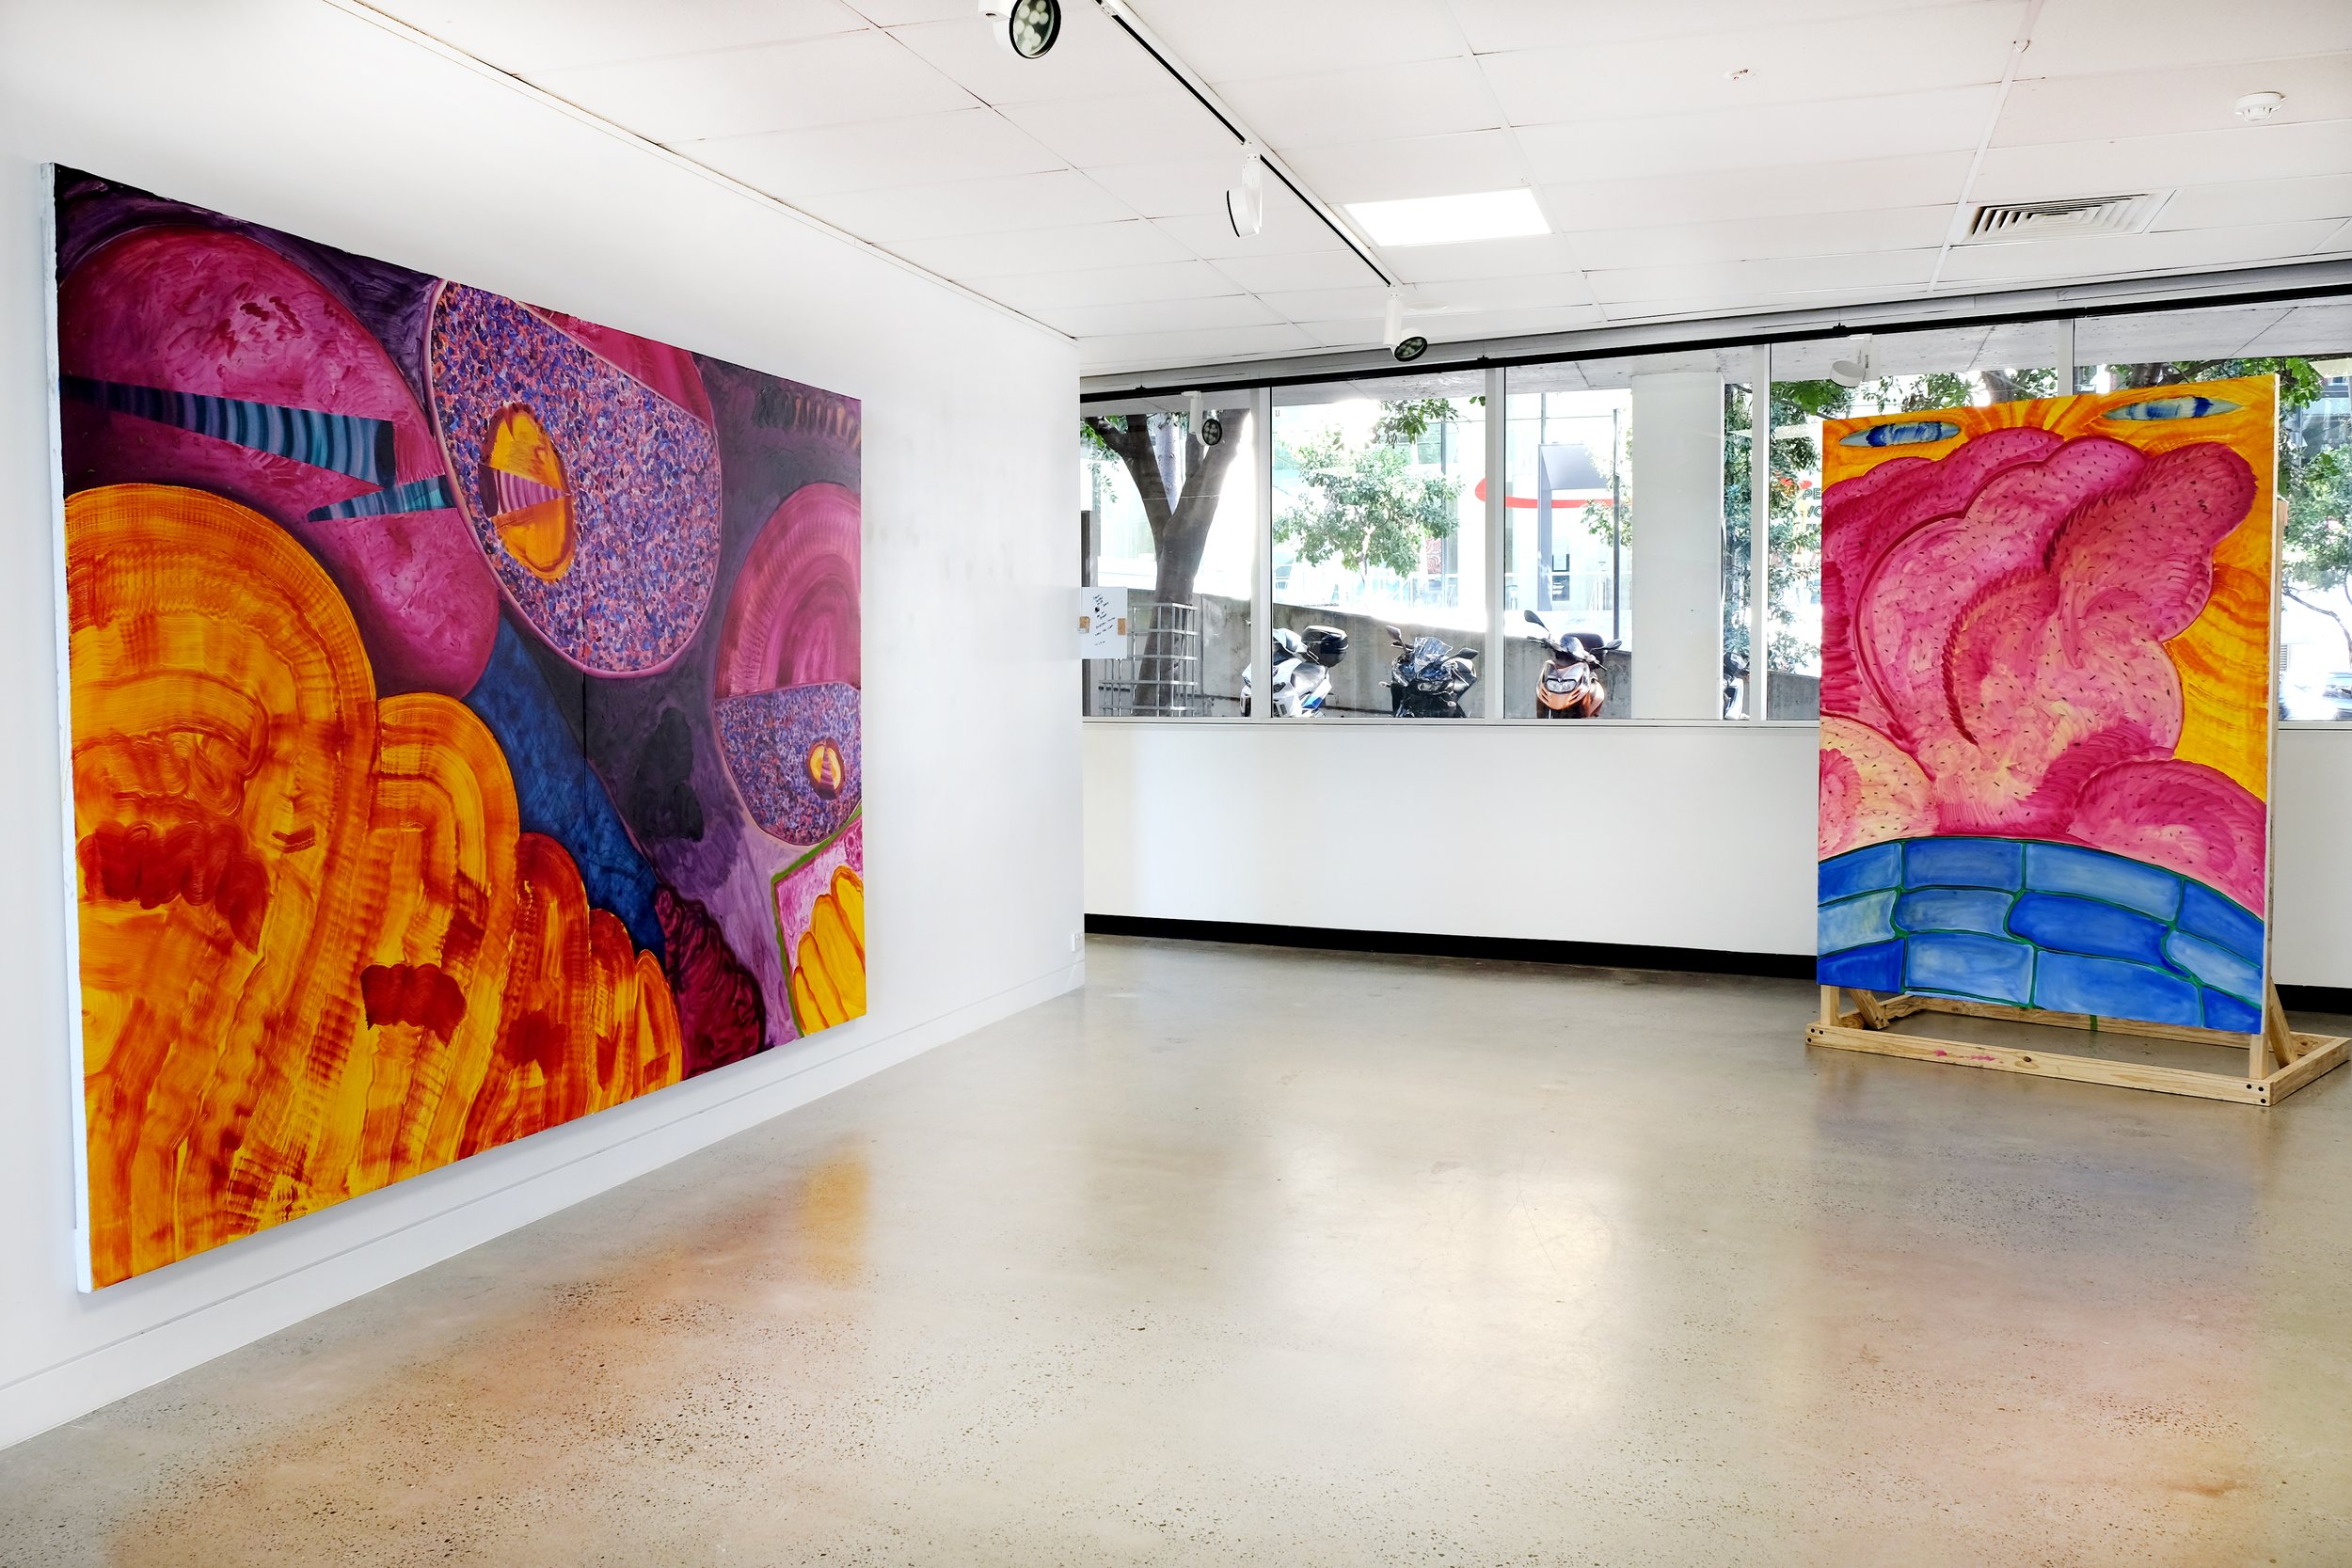  Installation View  Left:  Lacking sleep, rocking Tilly and watching End Game,  2023, oil on polycotton and canvas, 195cm x 291cm.  Right:  Thumb sucker , 2023, oil on poly cotton, 195cm x 140cm 